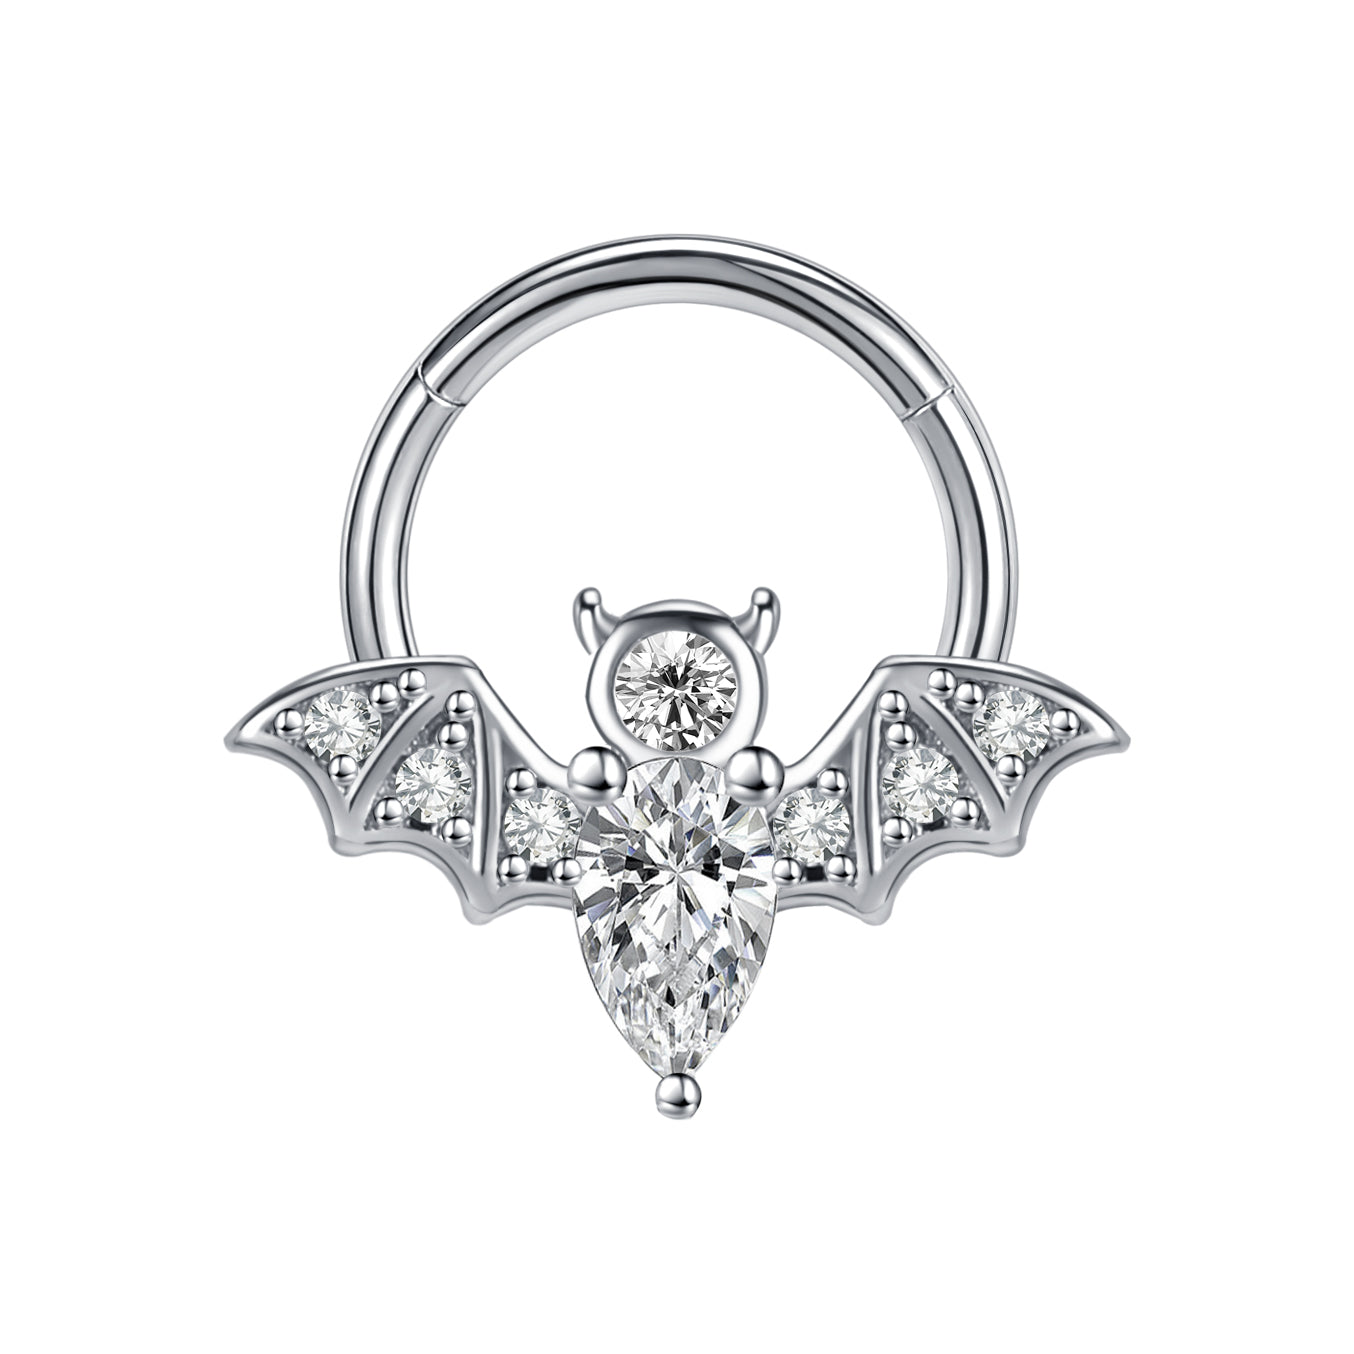 16g-punk-bat-nose-septum-ring-3-colors-clicker-stainless-steel-helix-cartilage-piercing